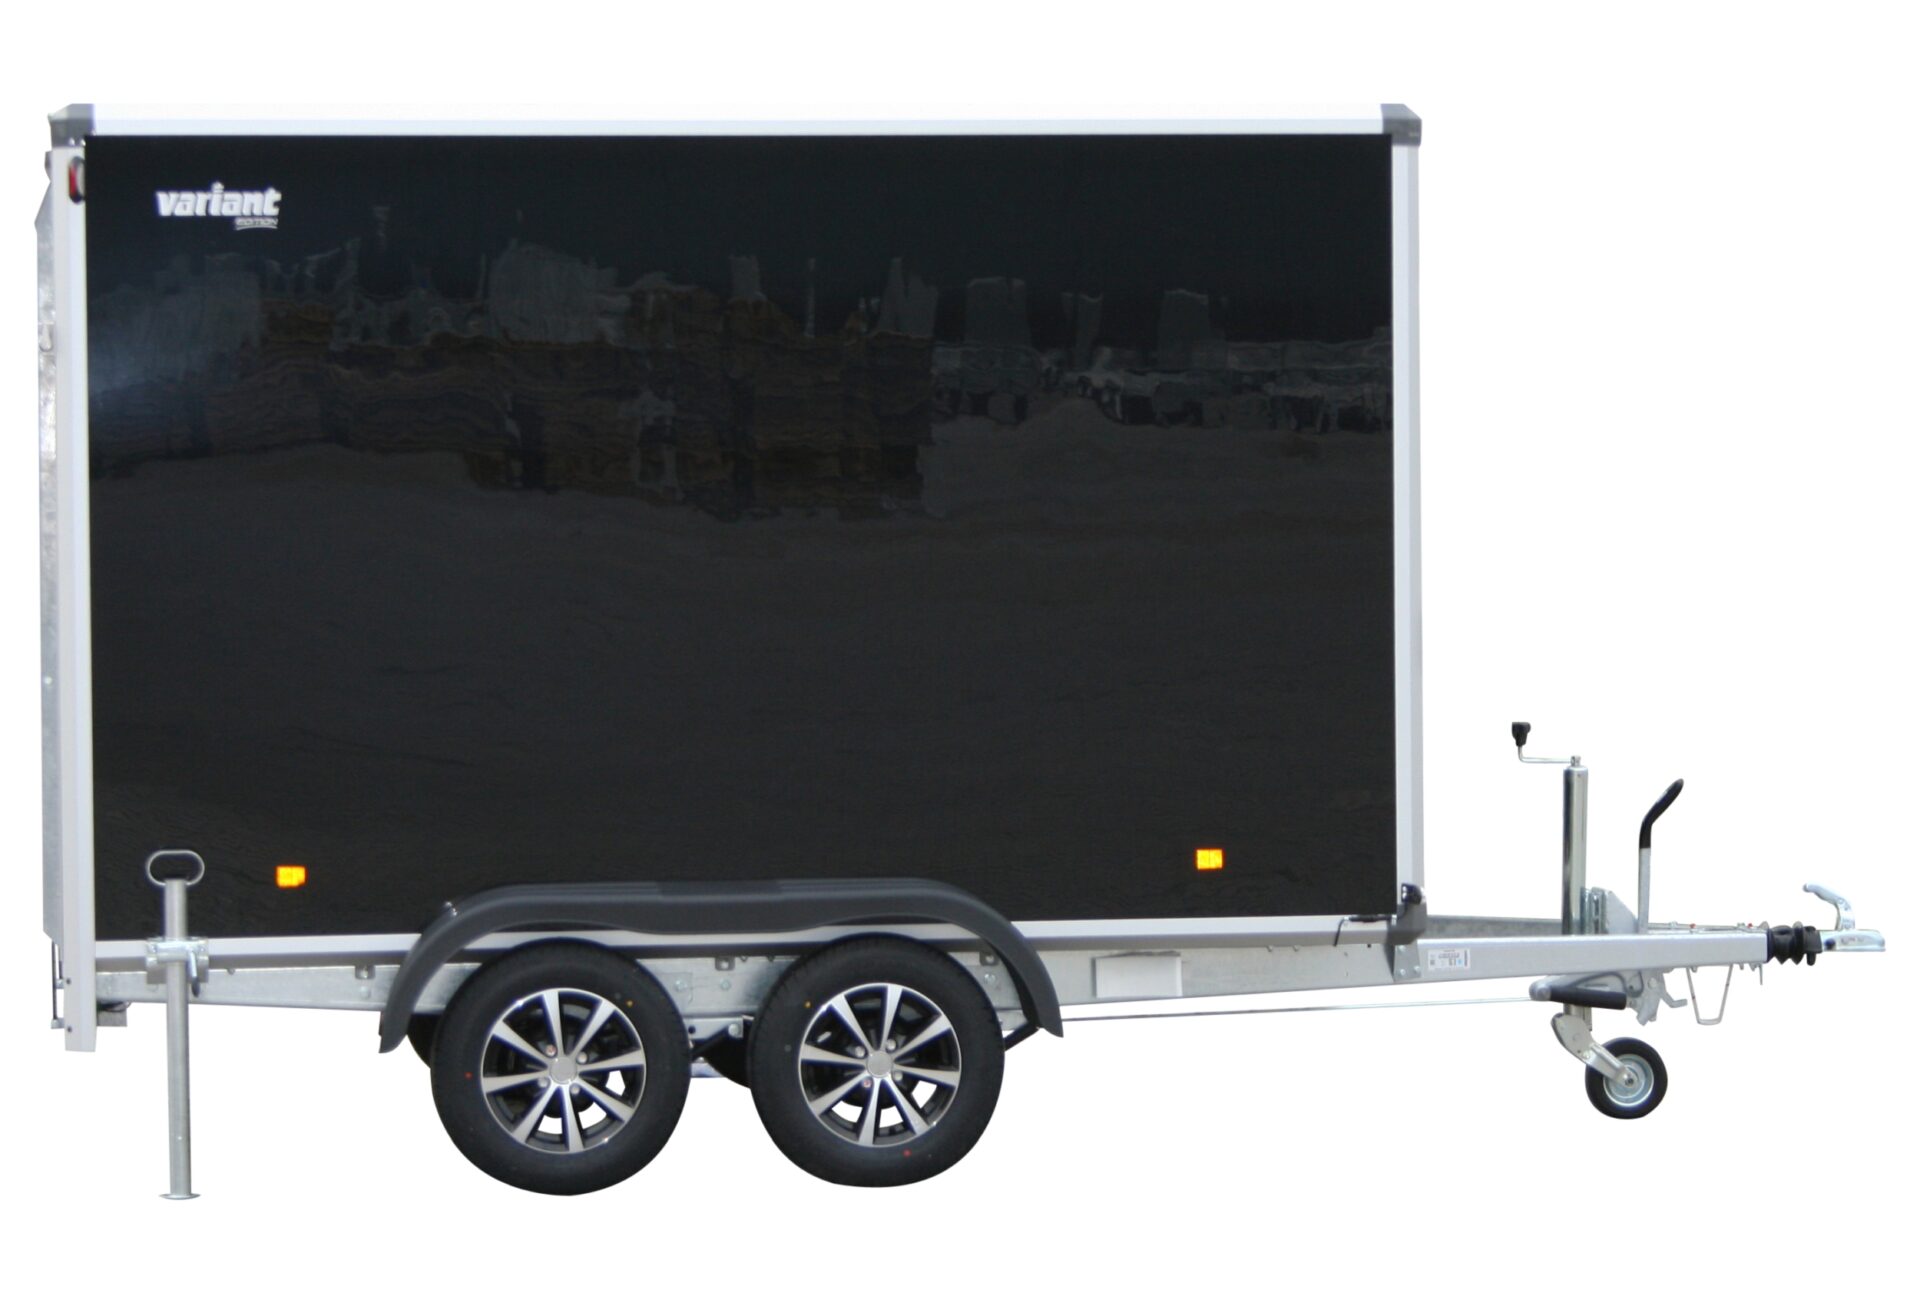 mag alloy wheels in black and silver, on cargo trailer for furniture